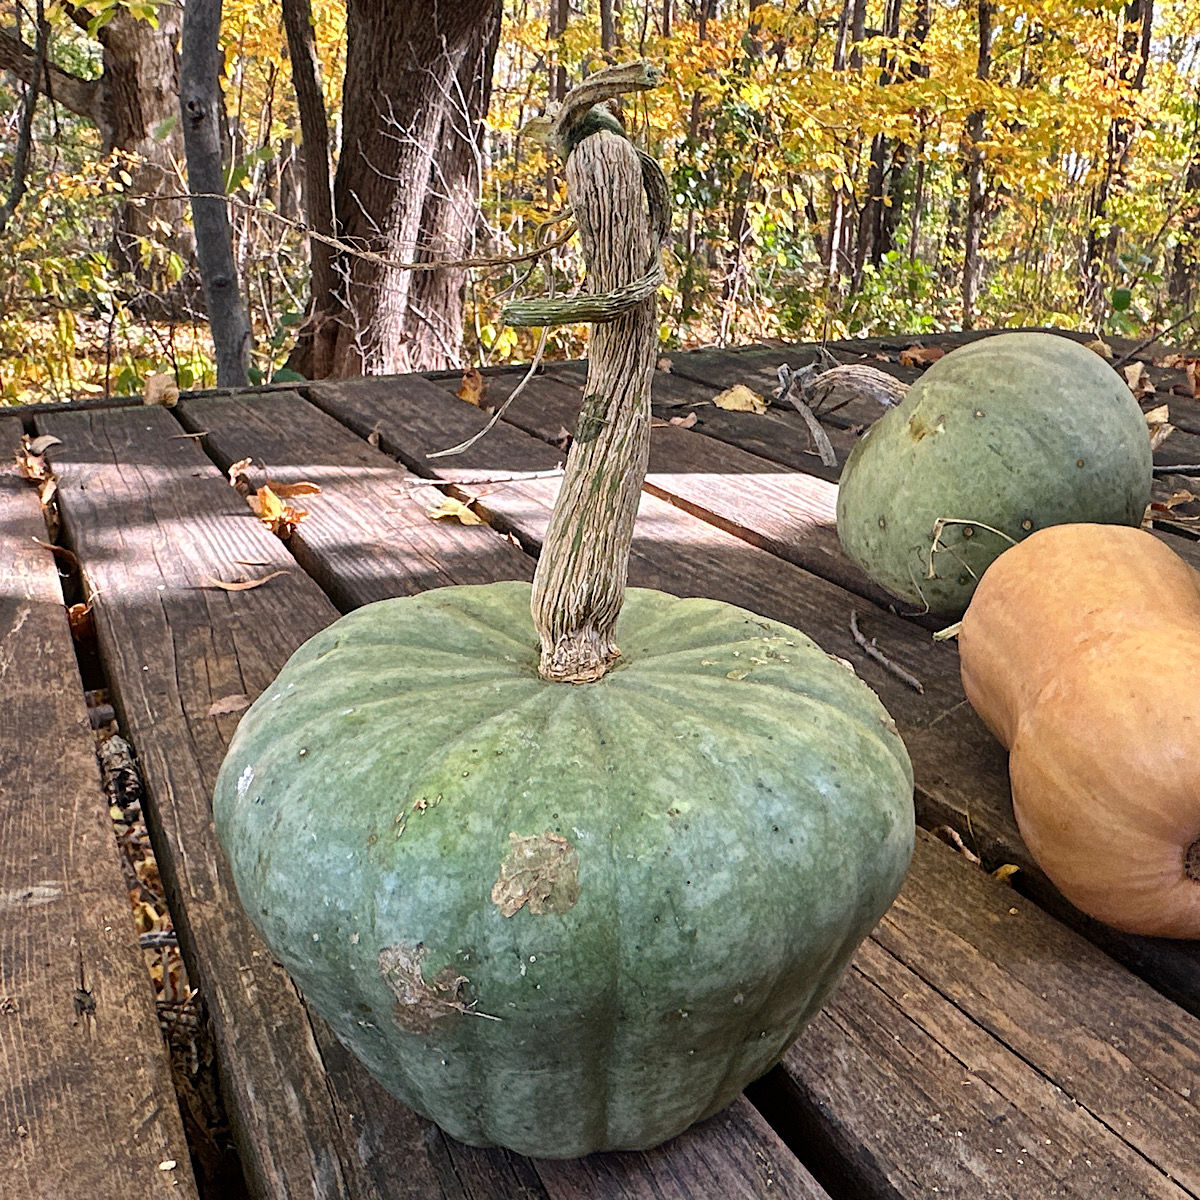 Sweet Meat: Heirloom squash variety with two other squash behind it.